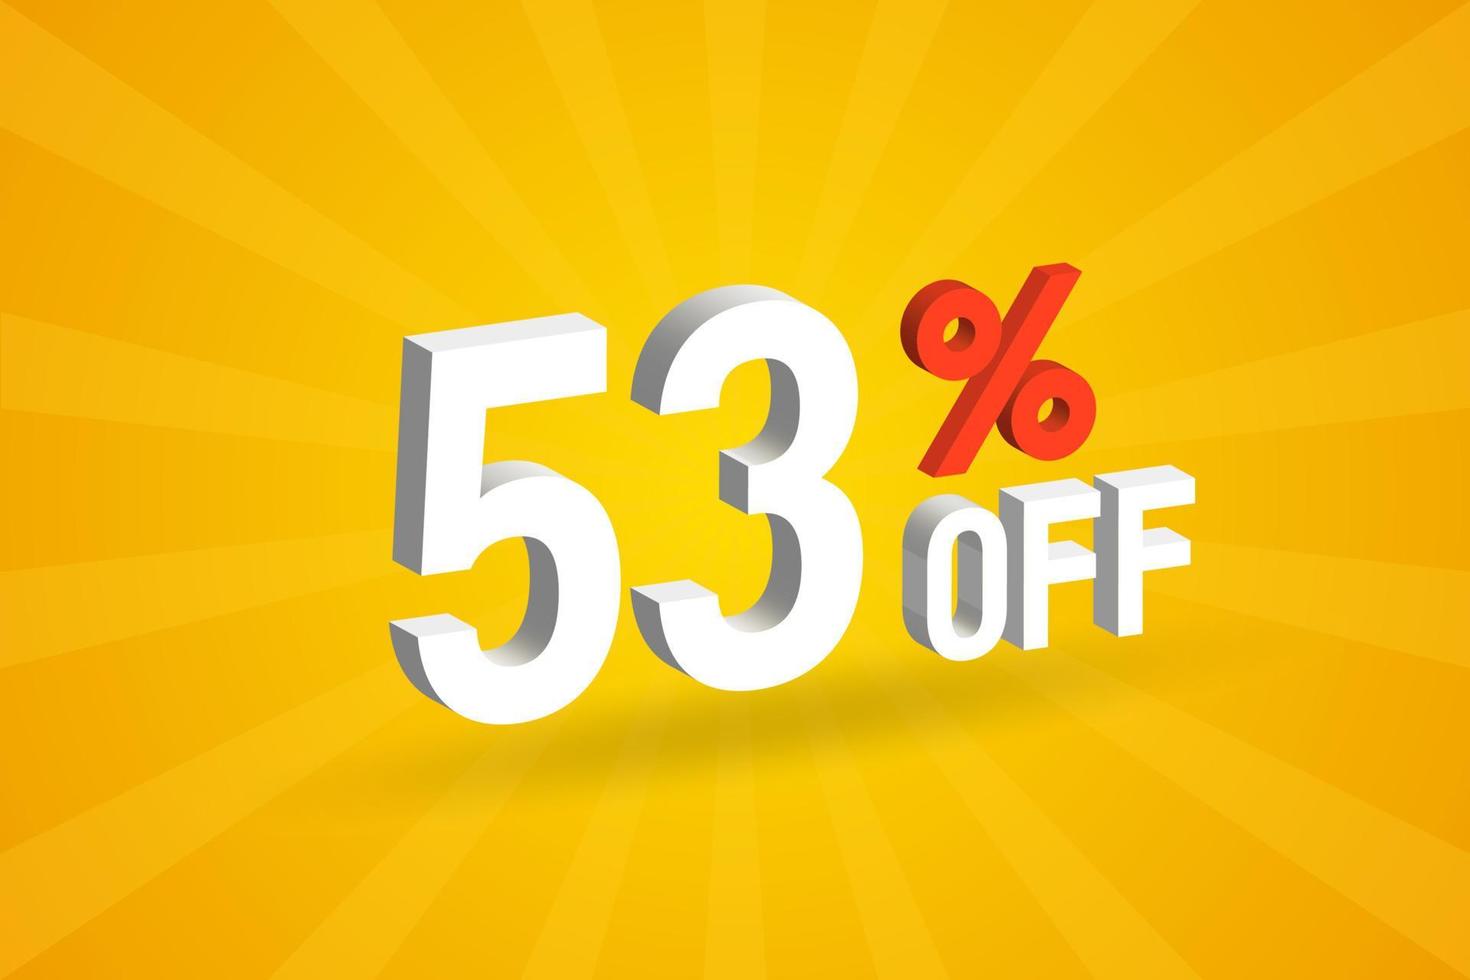 53 Percent off 3D Special promotional campaign design. 53 off 3D Discount Offer for Sale and marketing. vector